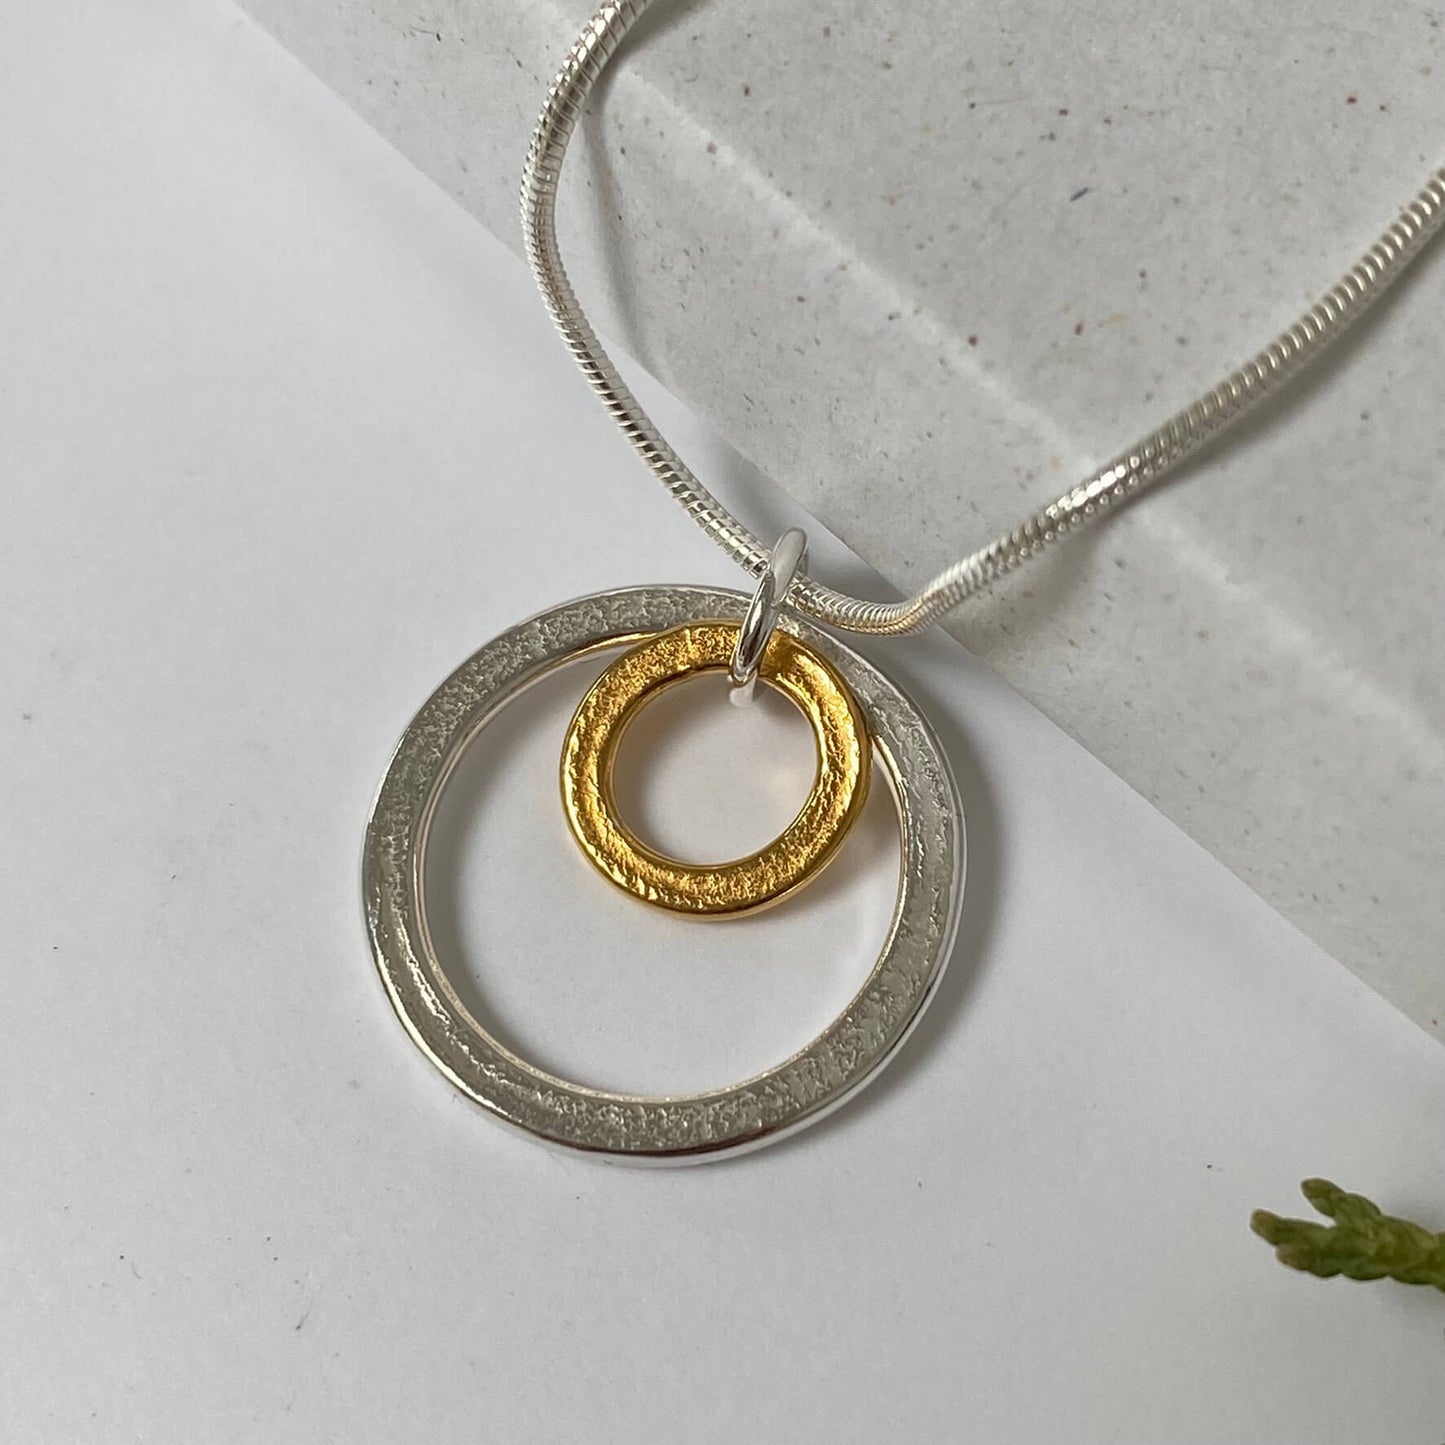 Double Circle of Love Necklace, Silver and Gold Vermeil Hoop Necklace